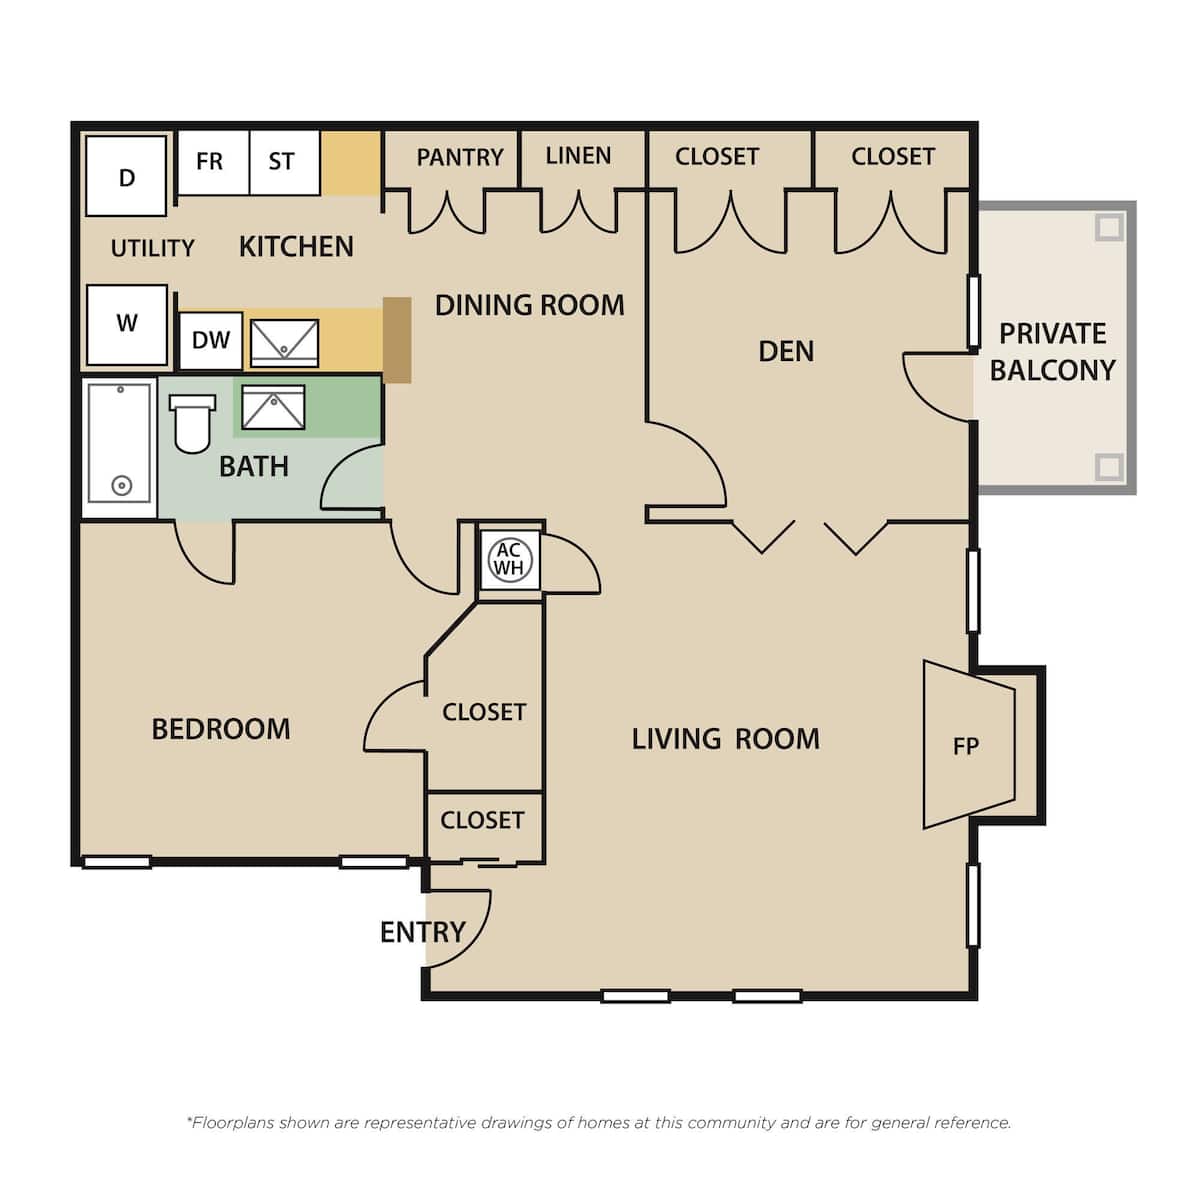 Floorplan diagram for SQUARE A9, showing 1 bedroom